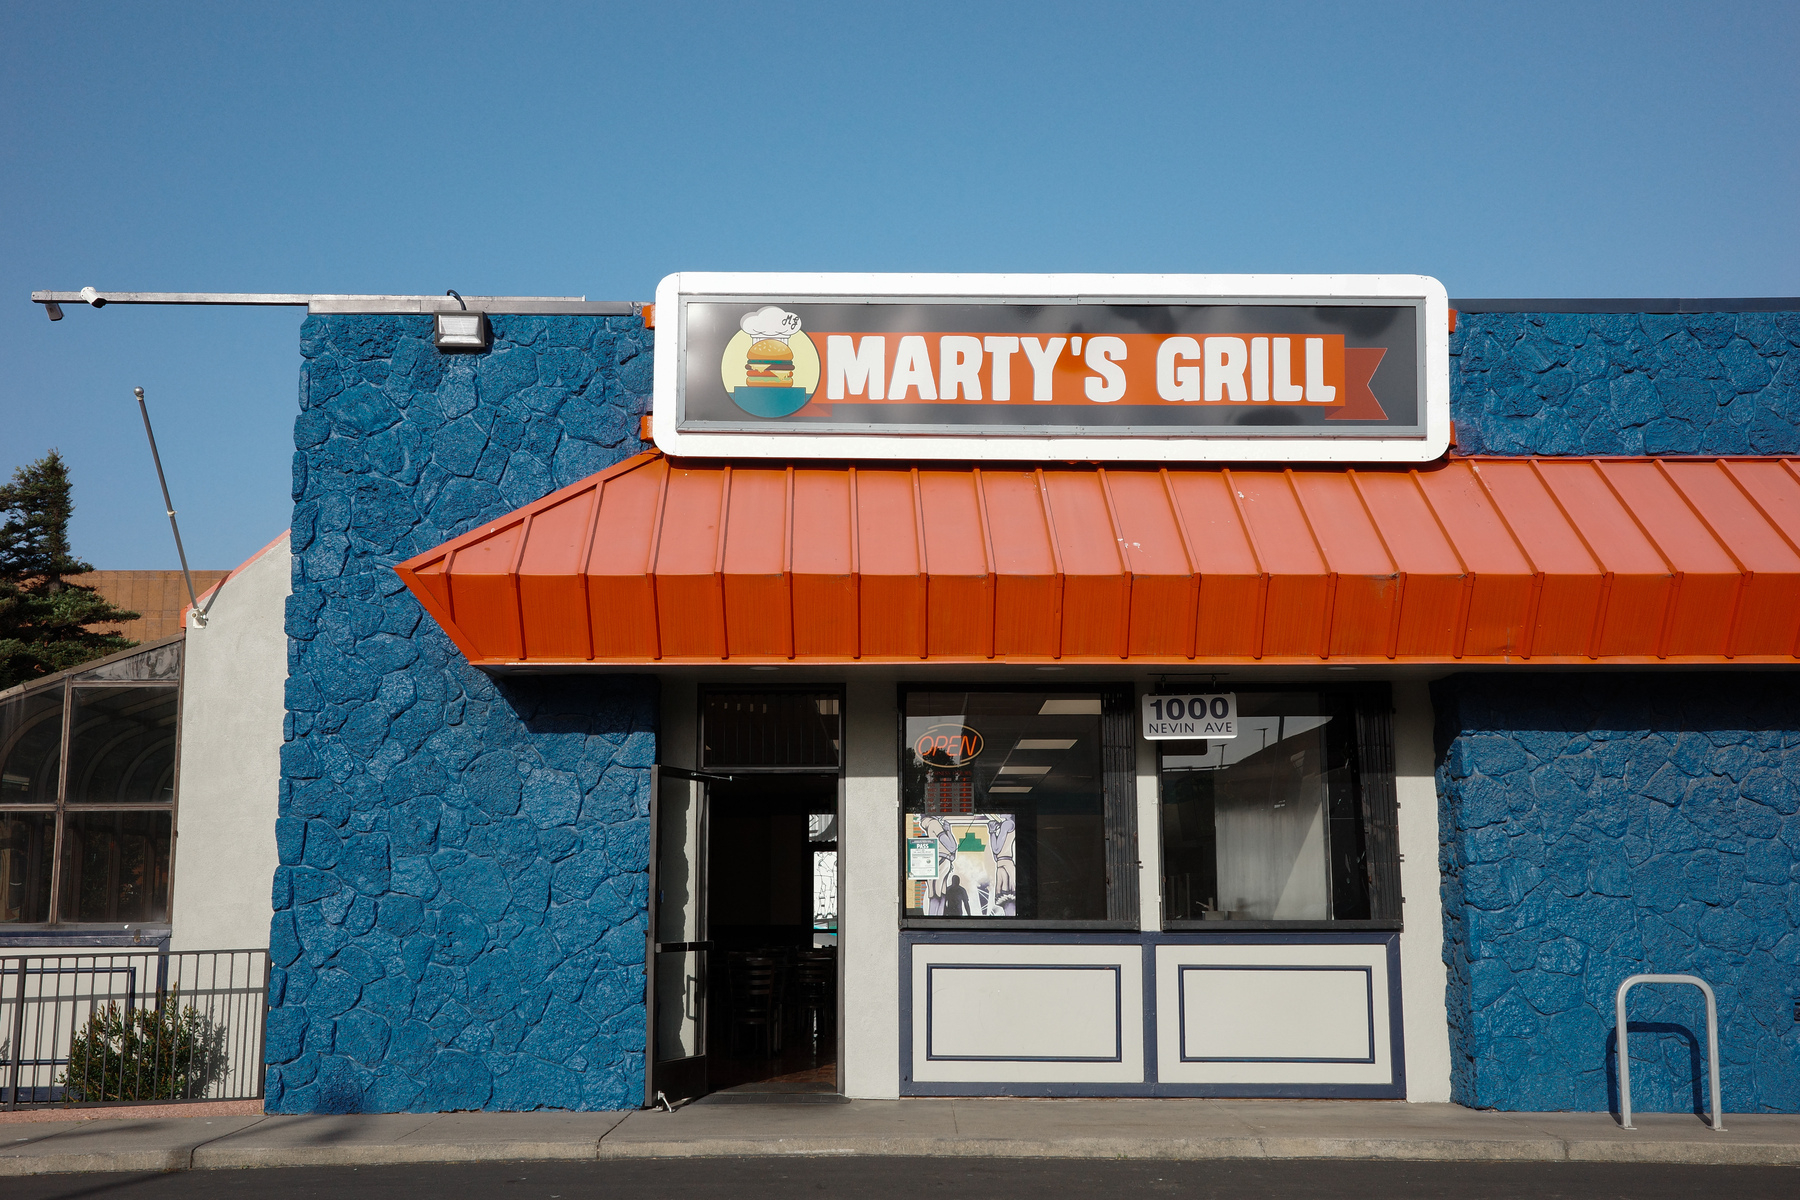 A blue and orange restaurant building that says Marty's Grill